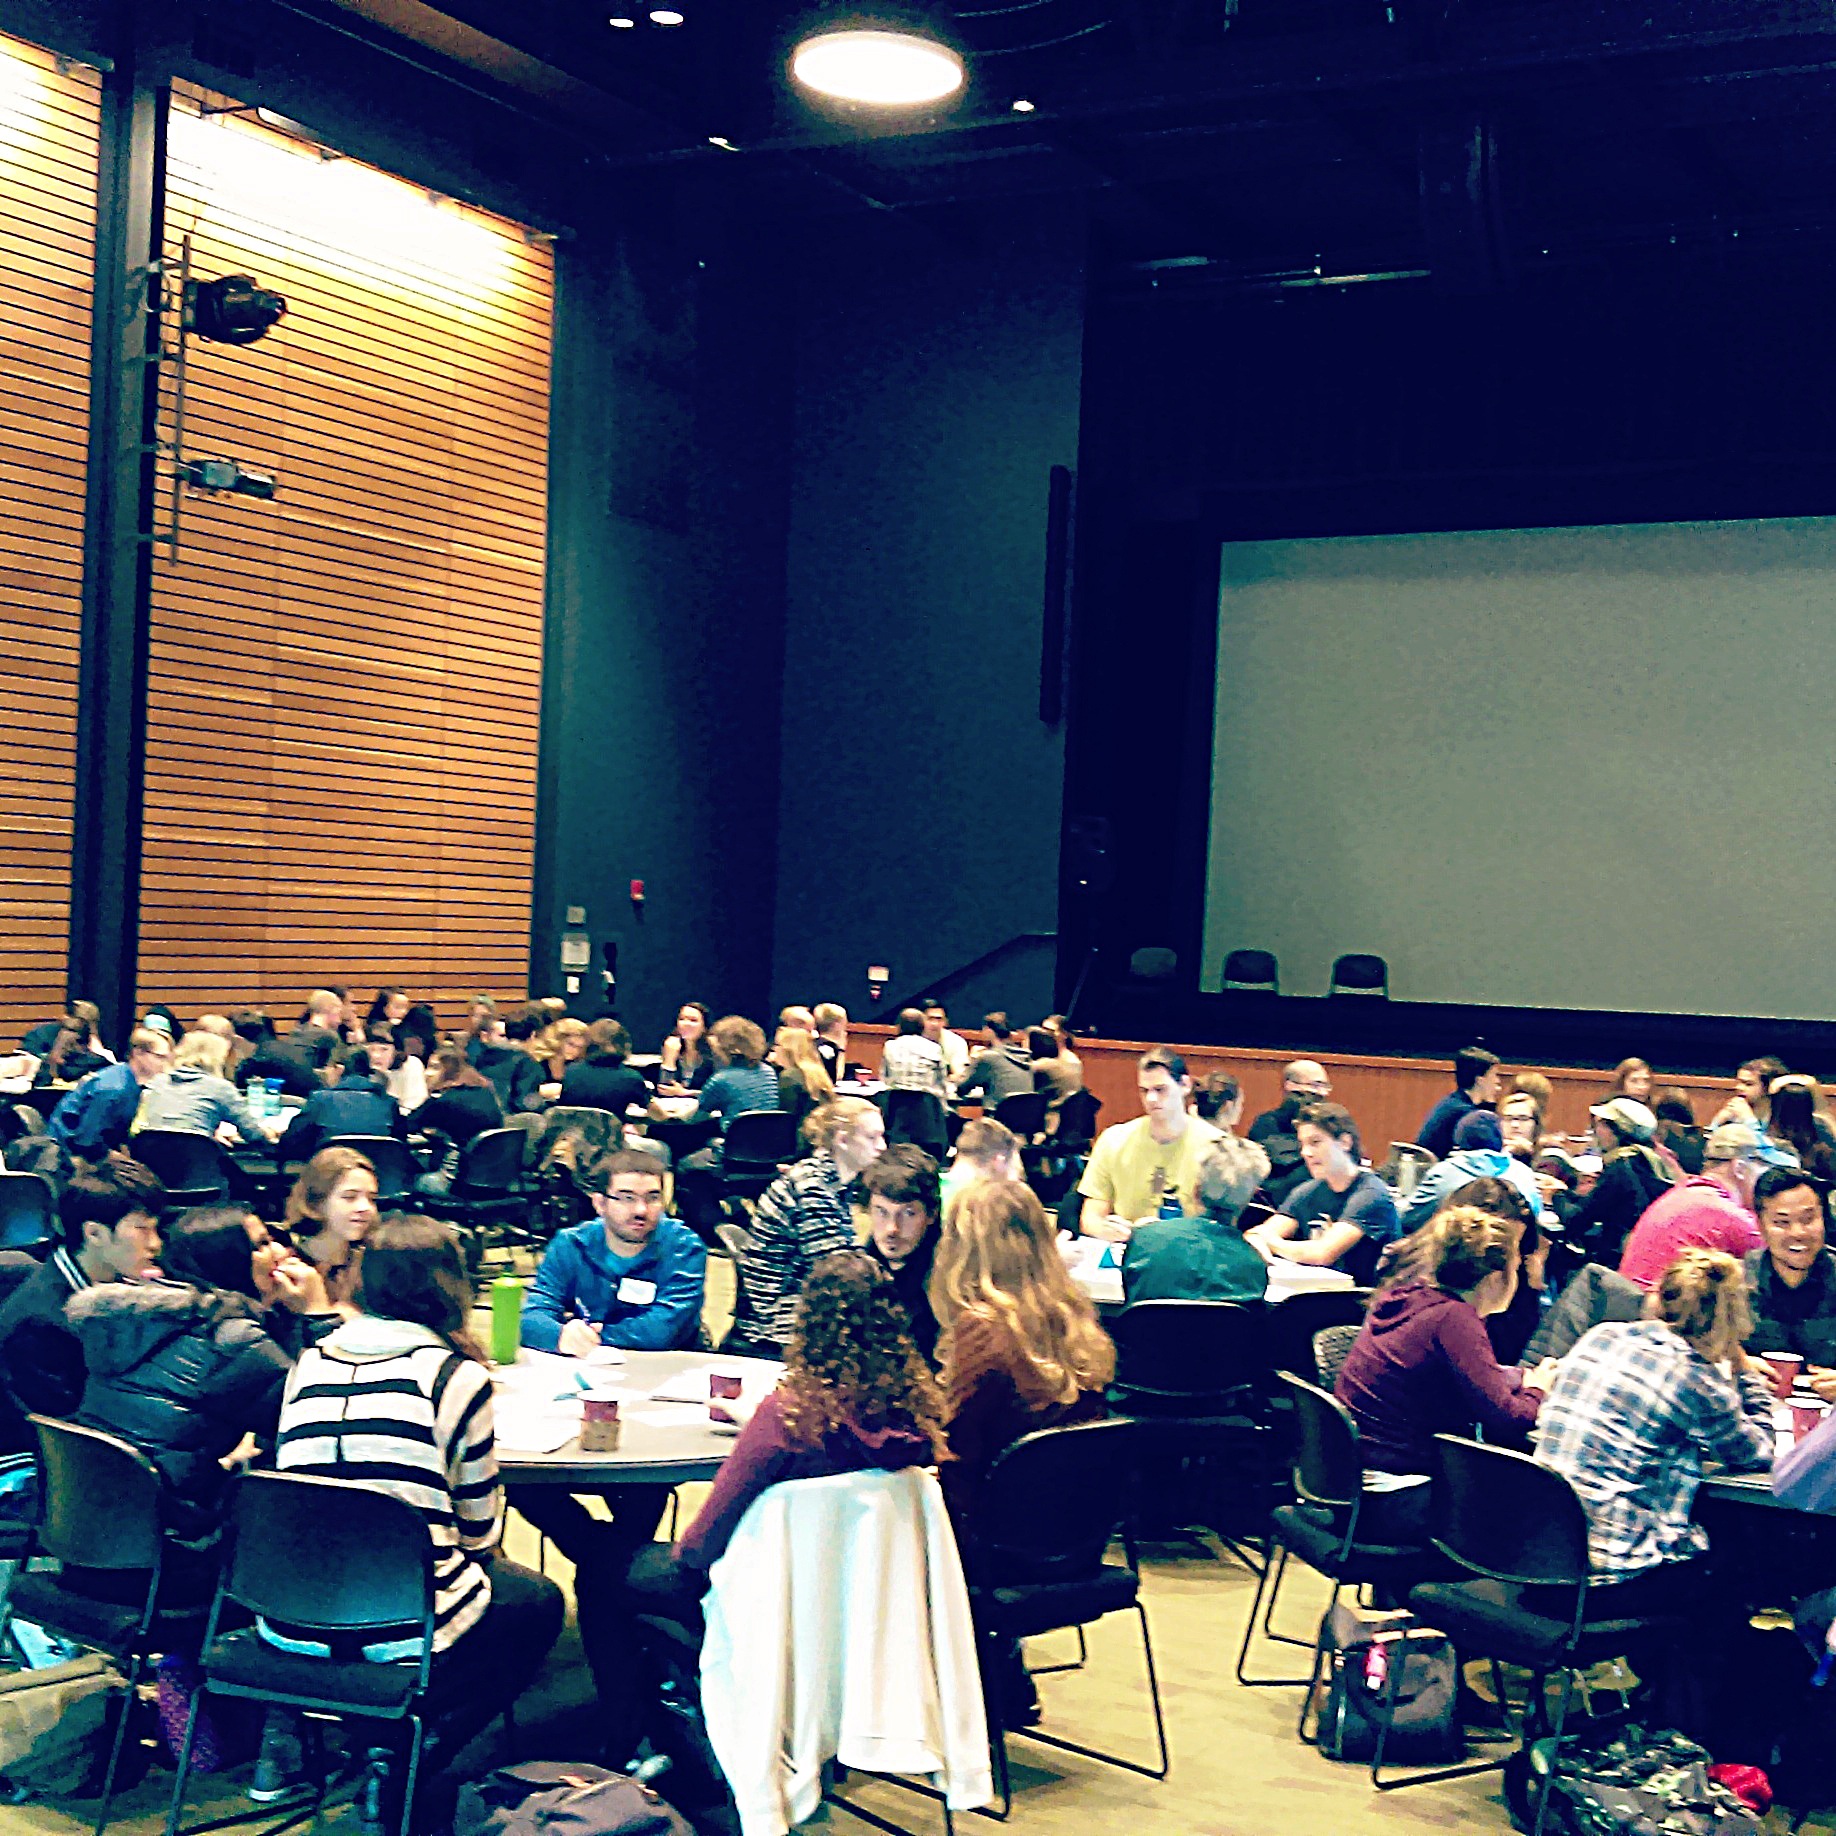 More than 160 students gather to discuss climate change in Mobius Hall at Cascadia Collage in Bothell. Contributed photo